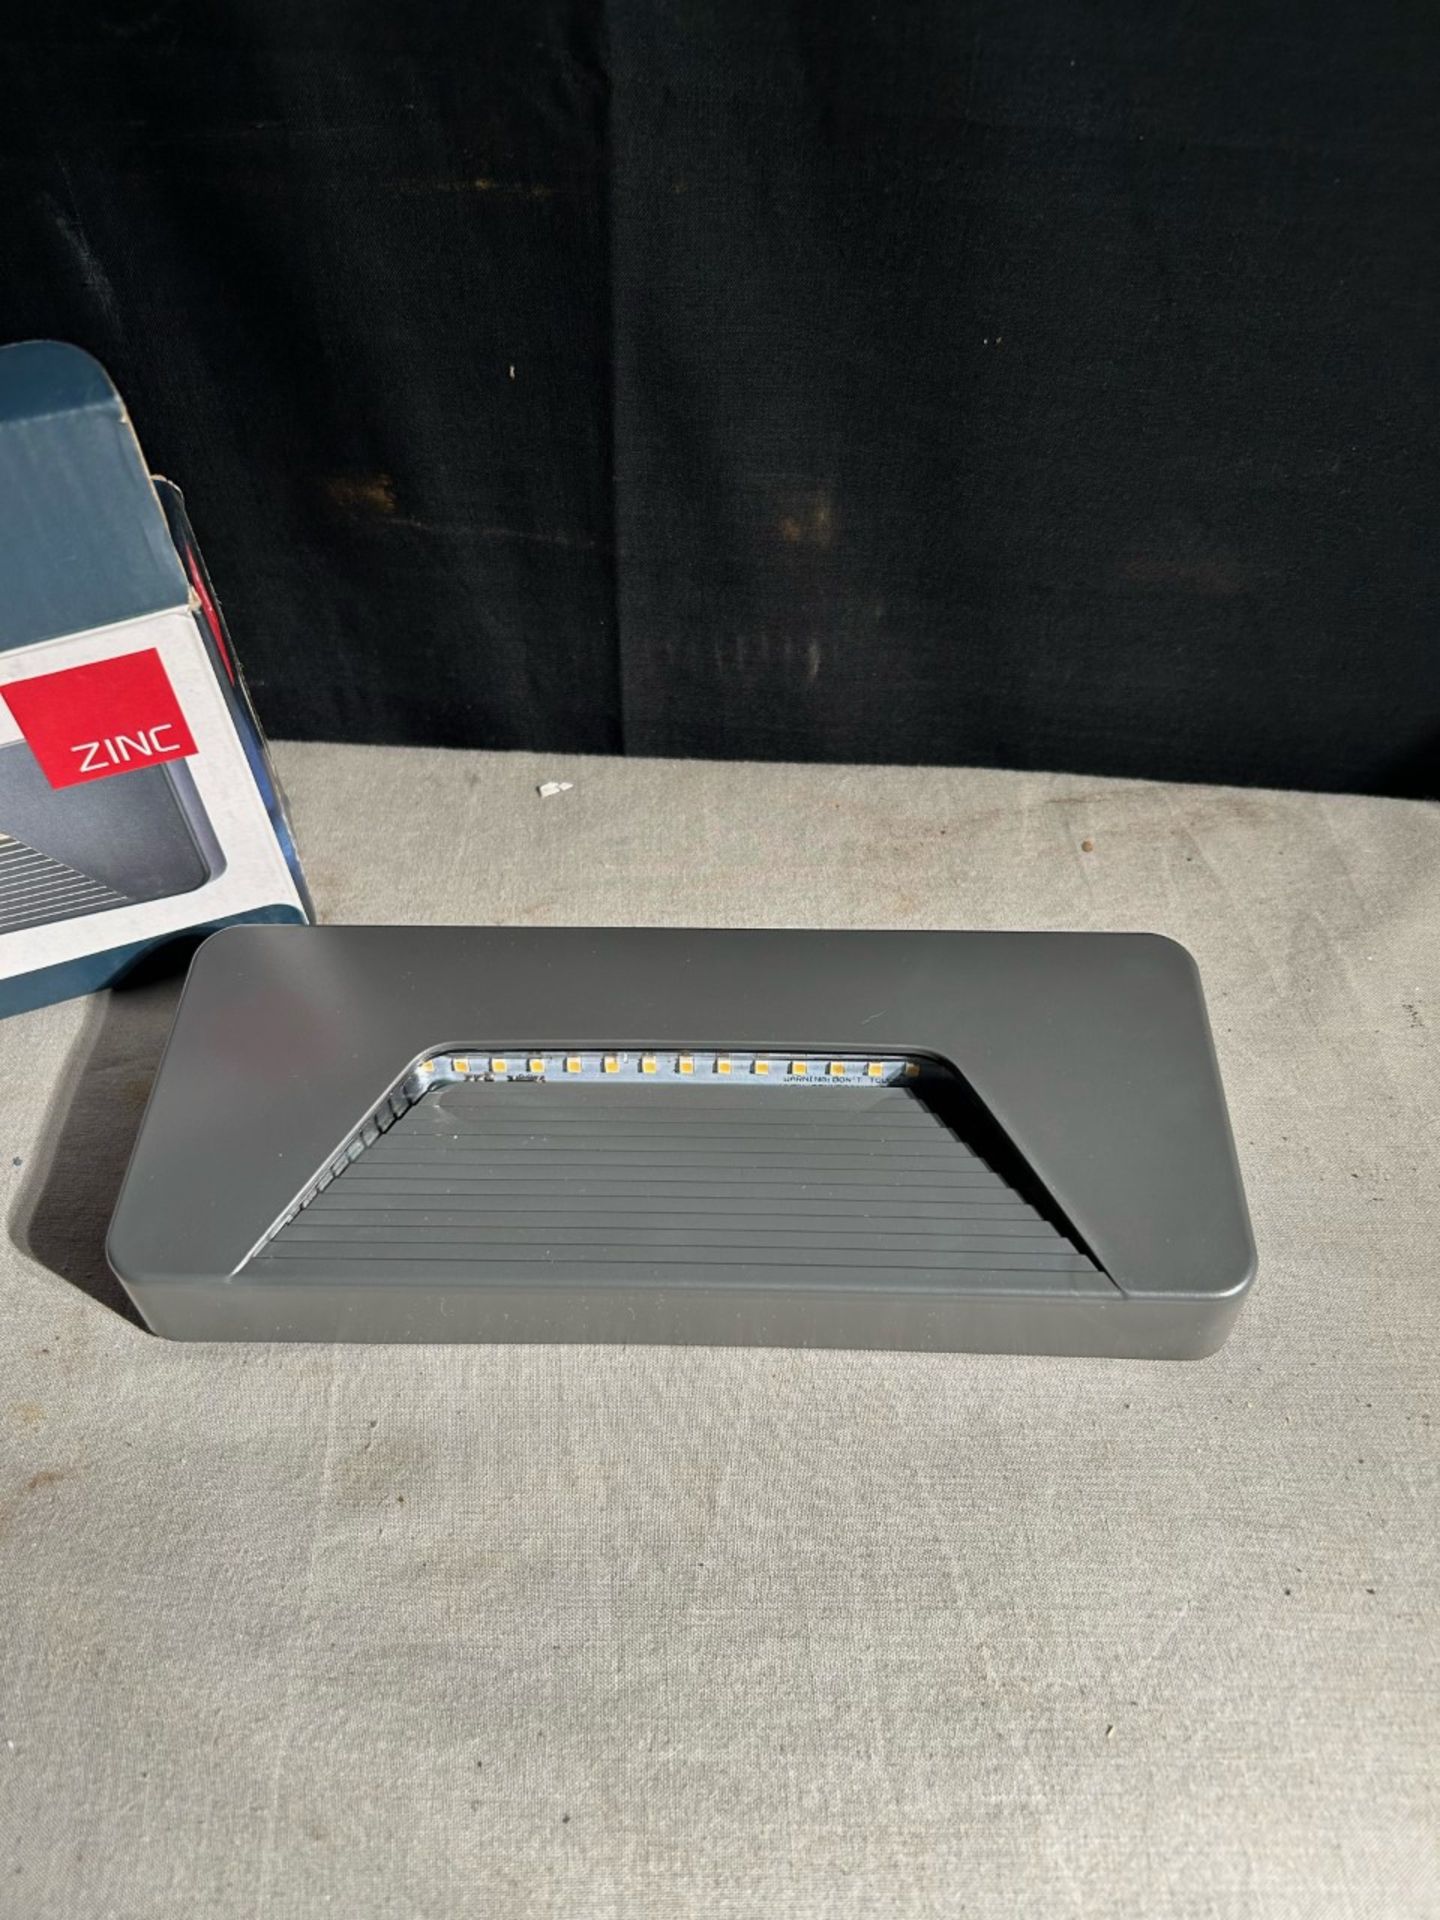 Zinc Soryx LED surface brick/ guide light. Matt anthracite charcoal colour. New in box - Image 2 of 3